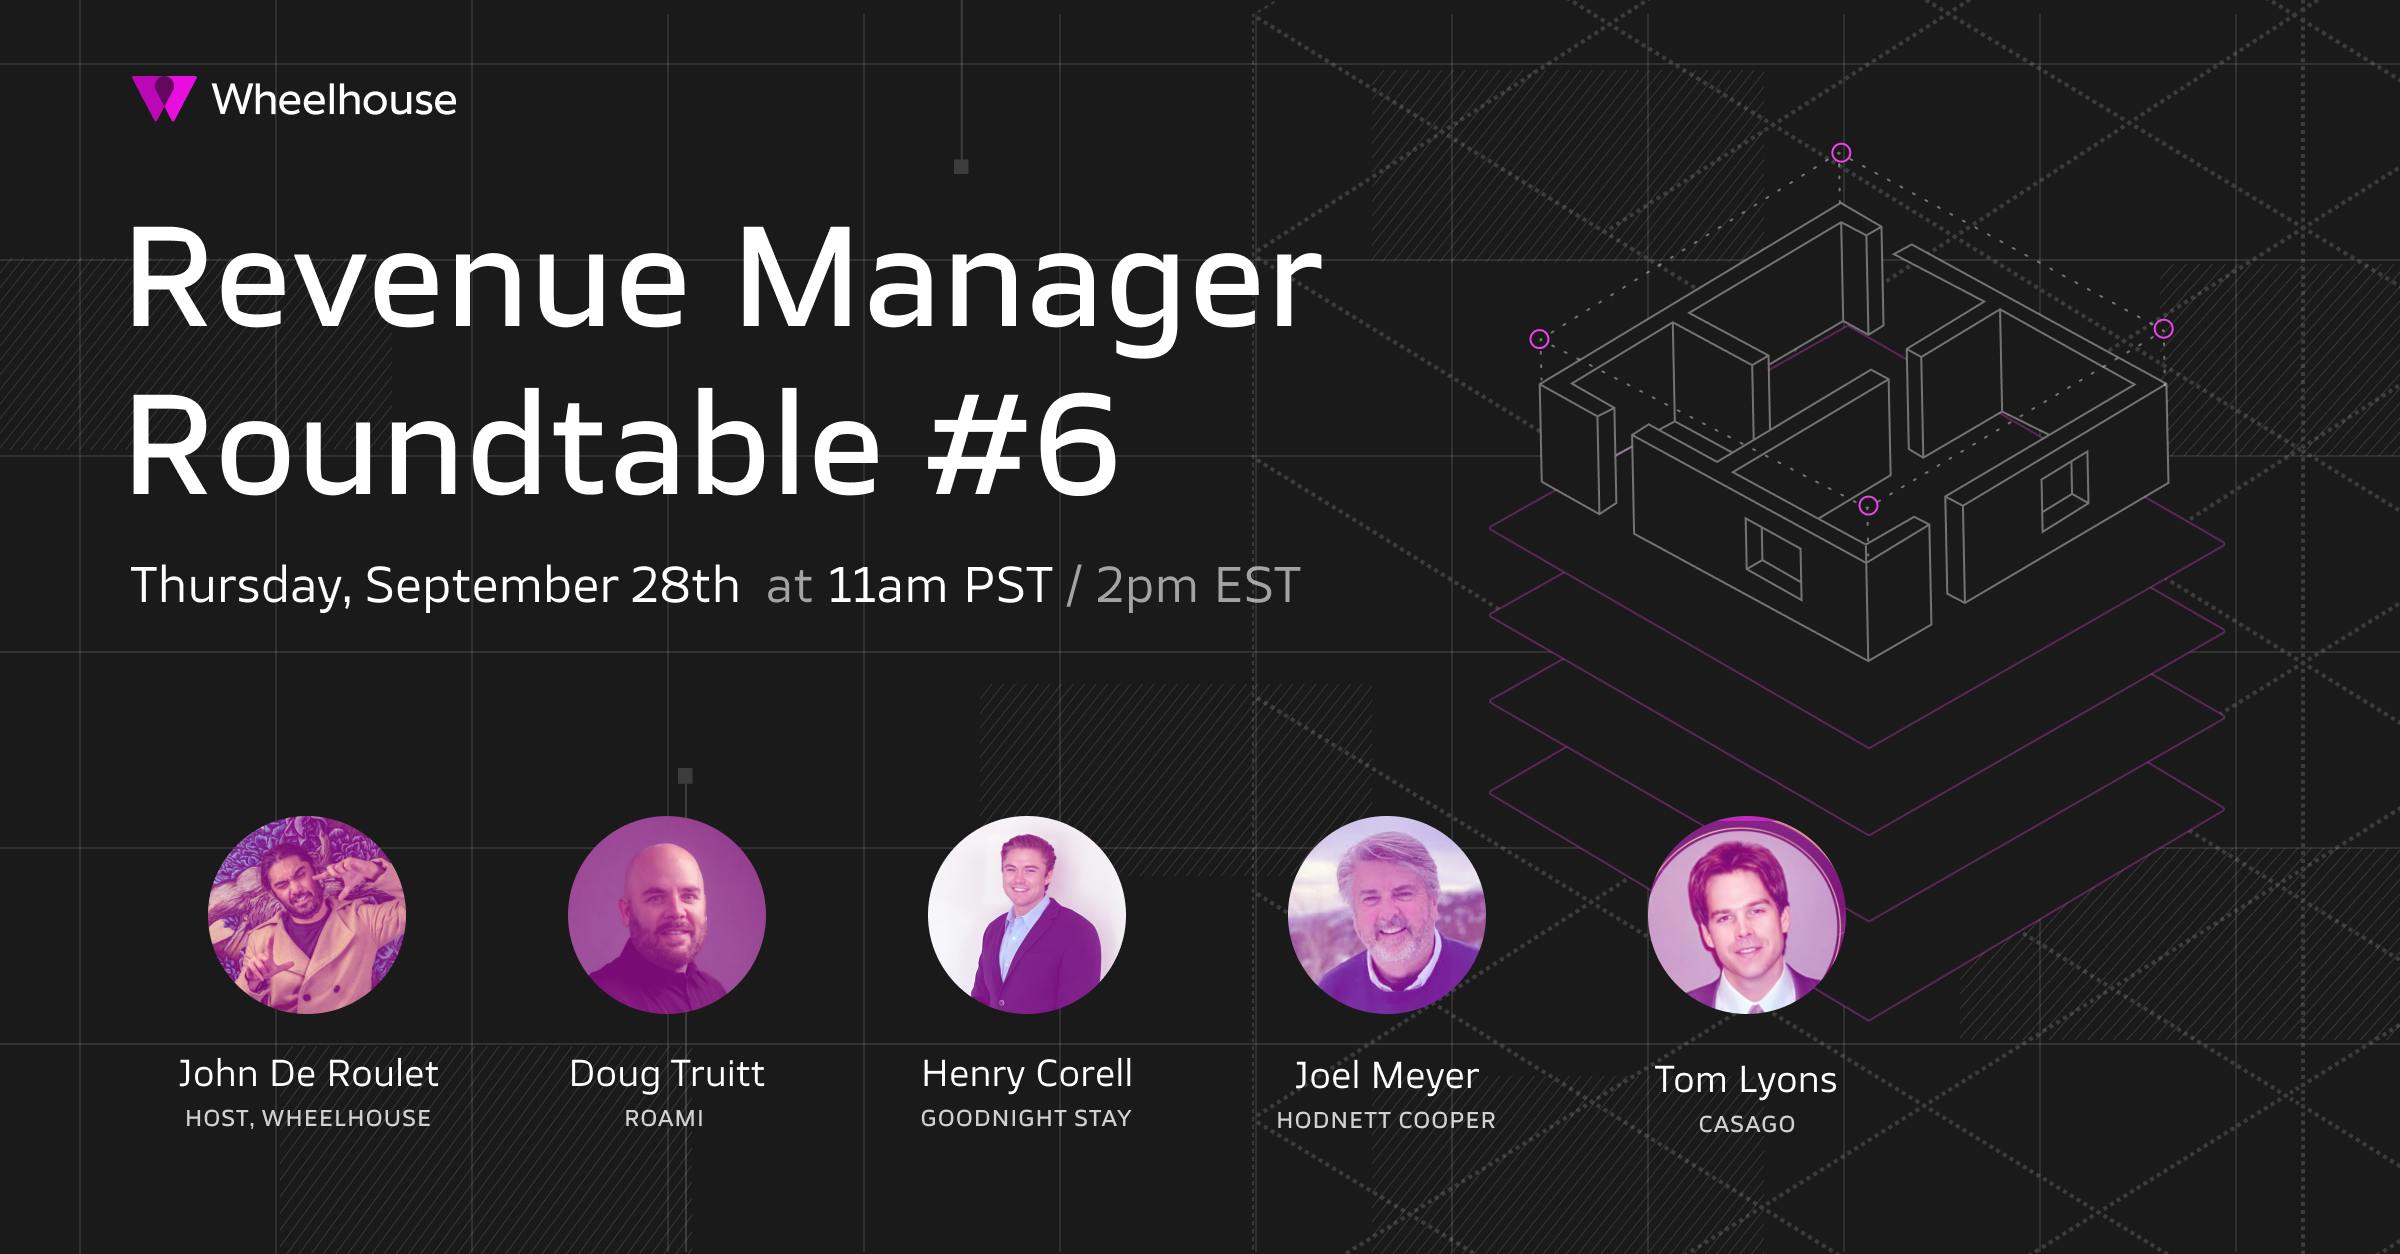 Revenue manager roundtable #6 profile